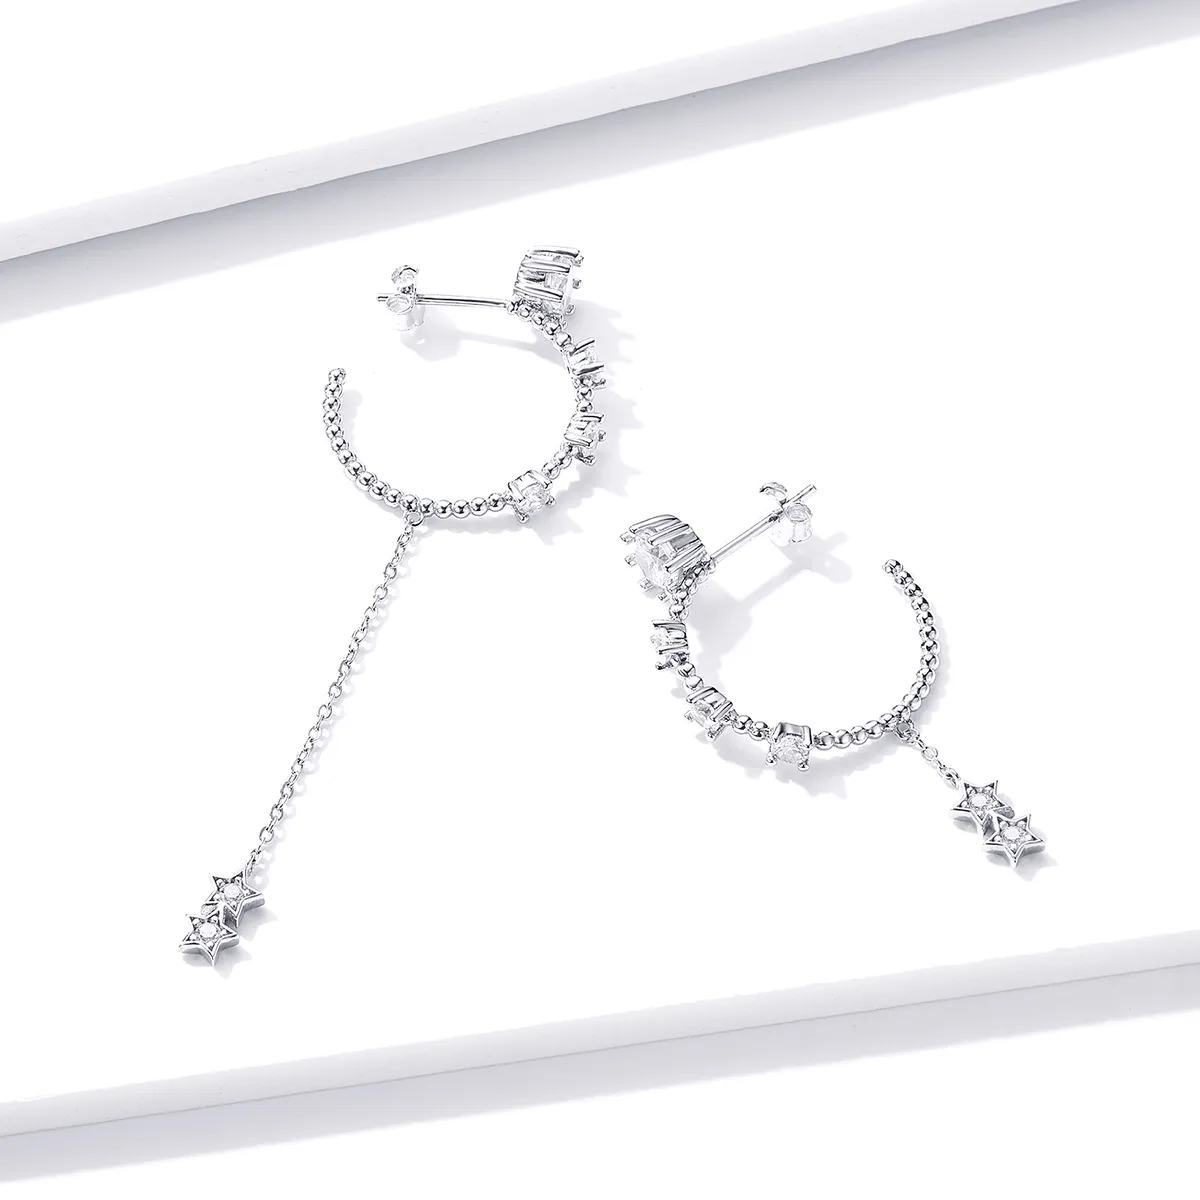 Pandora Style Bright Hanging Earrings - BSE310